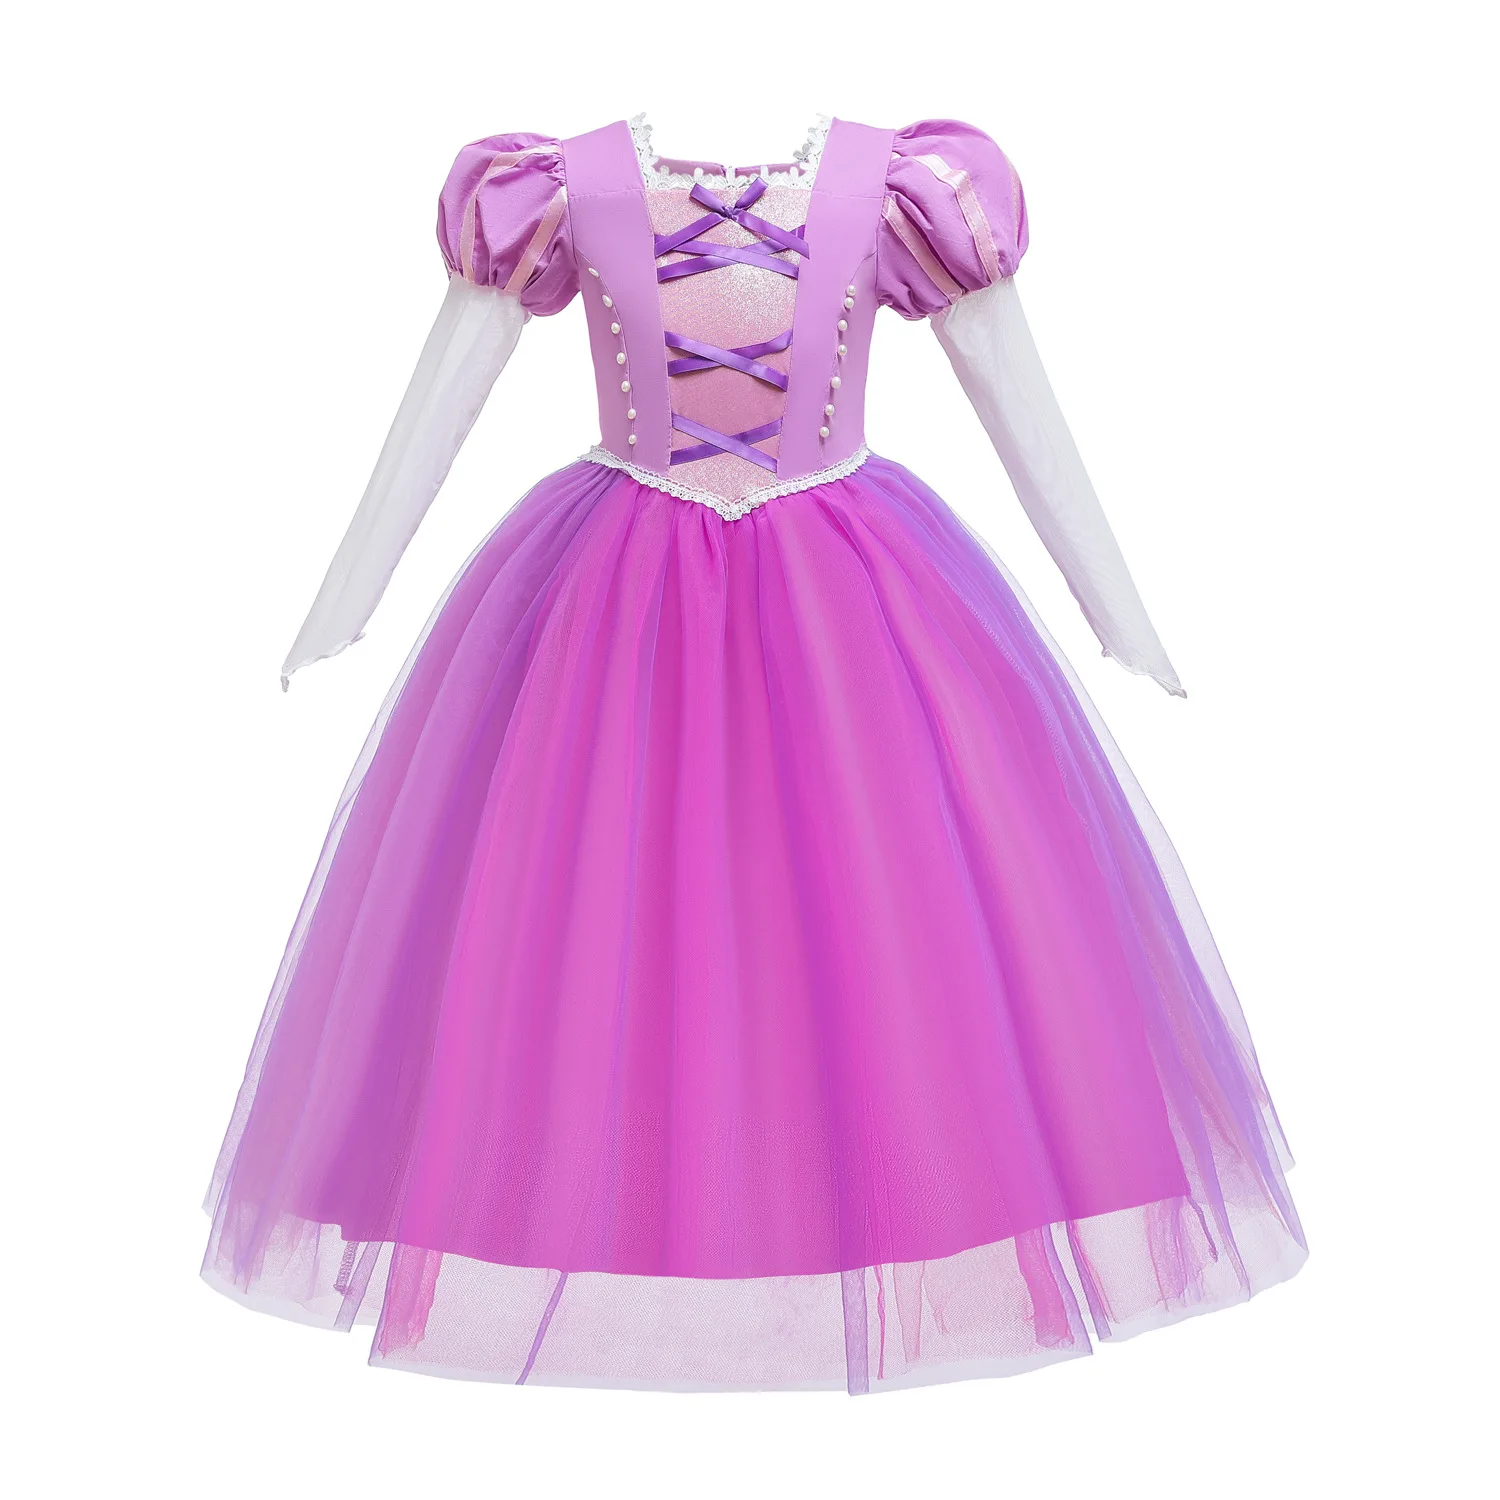 Kids Fancy Princess Girls Dress Frocks Birthday Party Halloween Cosplay  Rapunzel Role Play Clothes - Buy Costume Kids Rapunzel Dress,Costume  Character Dress,Fancy Baby Girls Clothes Product on 